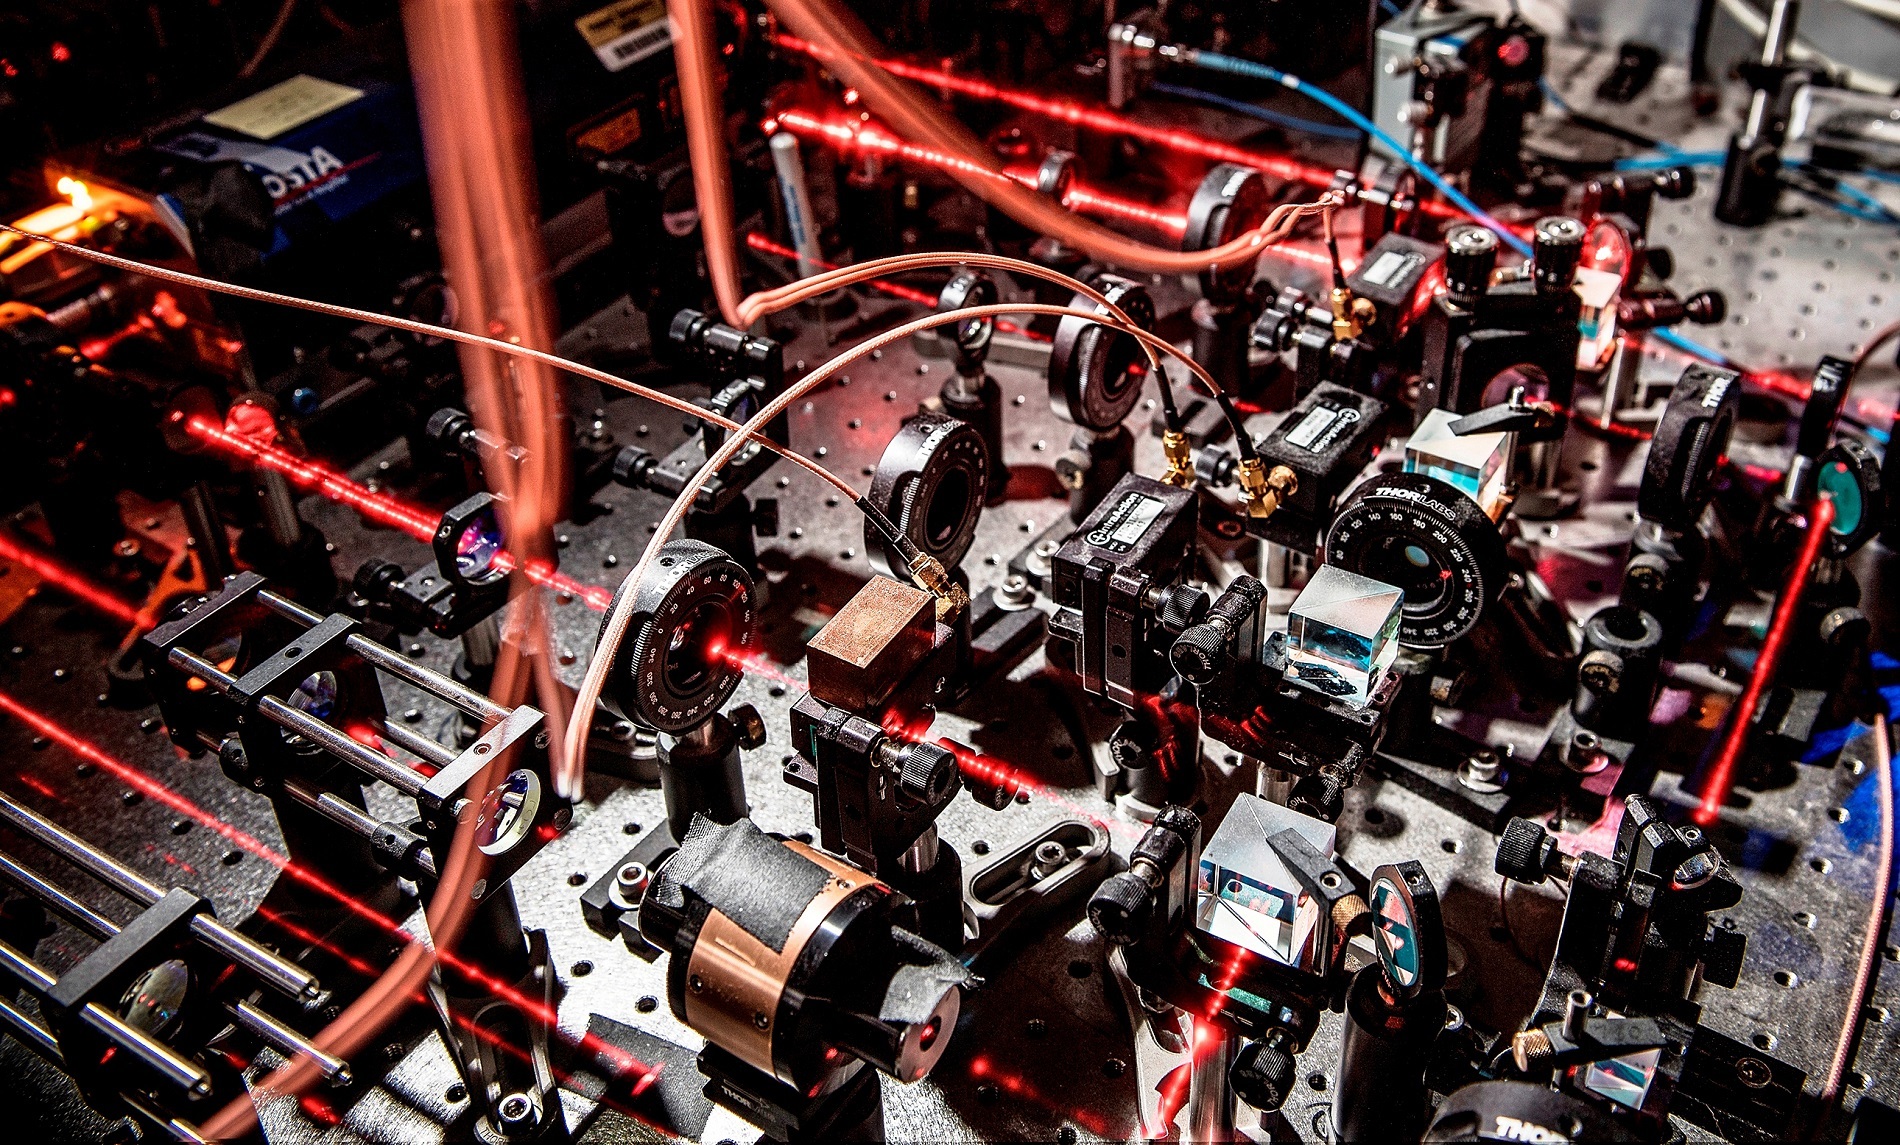 Purdue University researchers used lasers to trap and cool atoms down to nearly absolute zero, at which point they become a quantum fluid known as Bose-Einstein condensate, and collided condensates with opposite spins